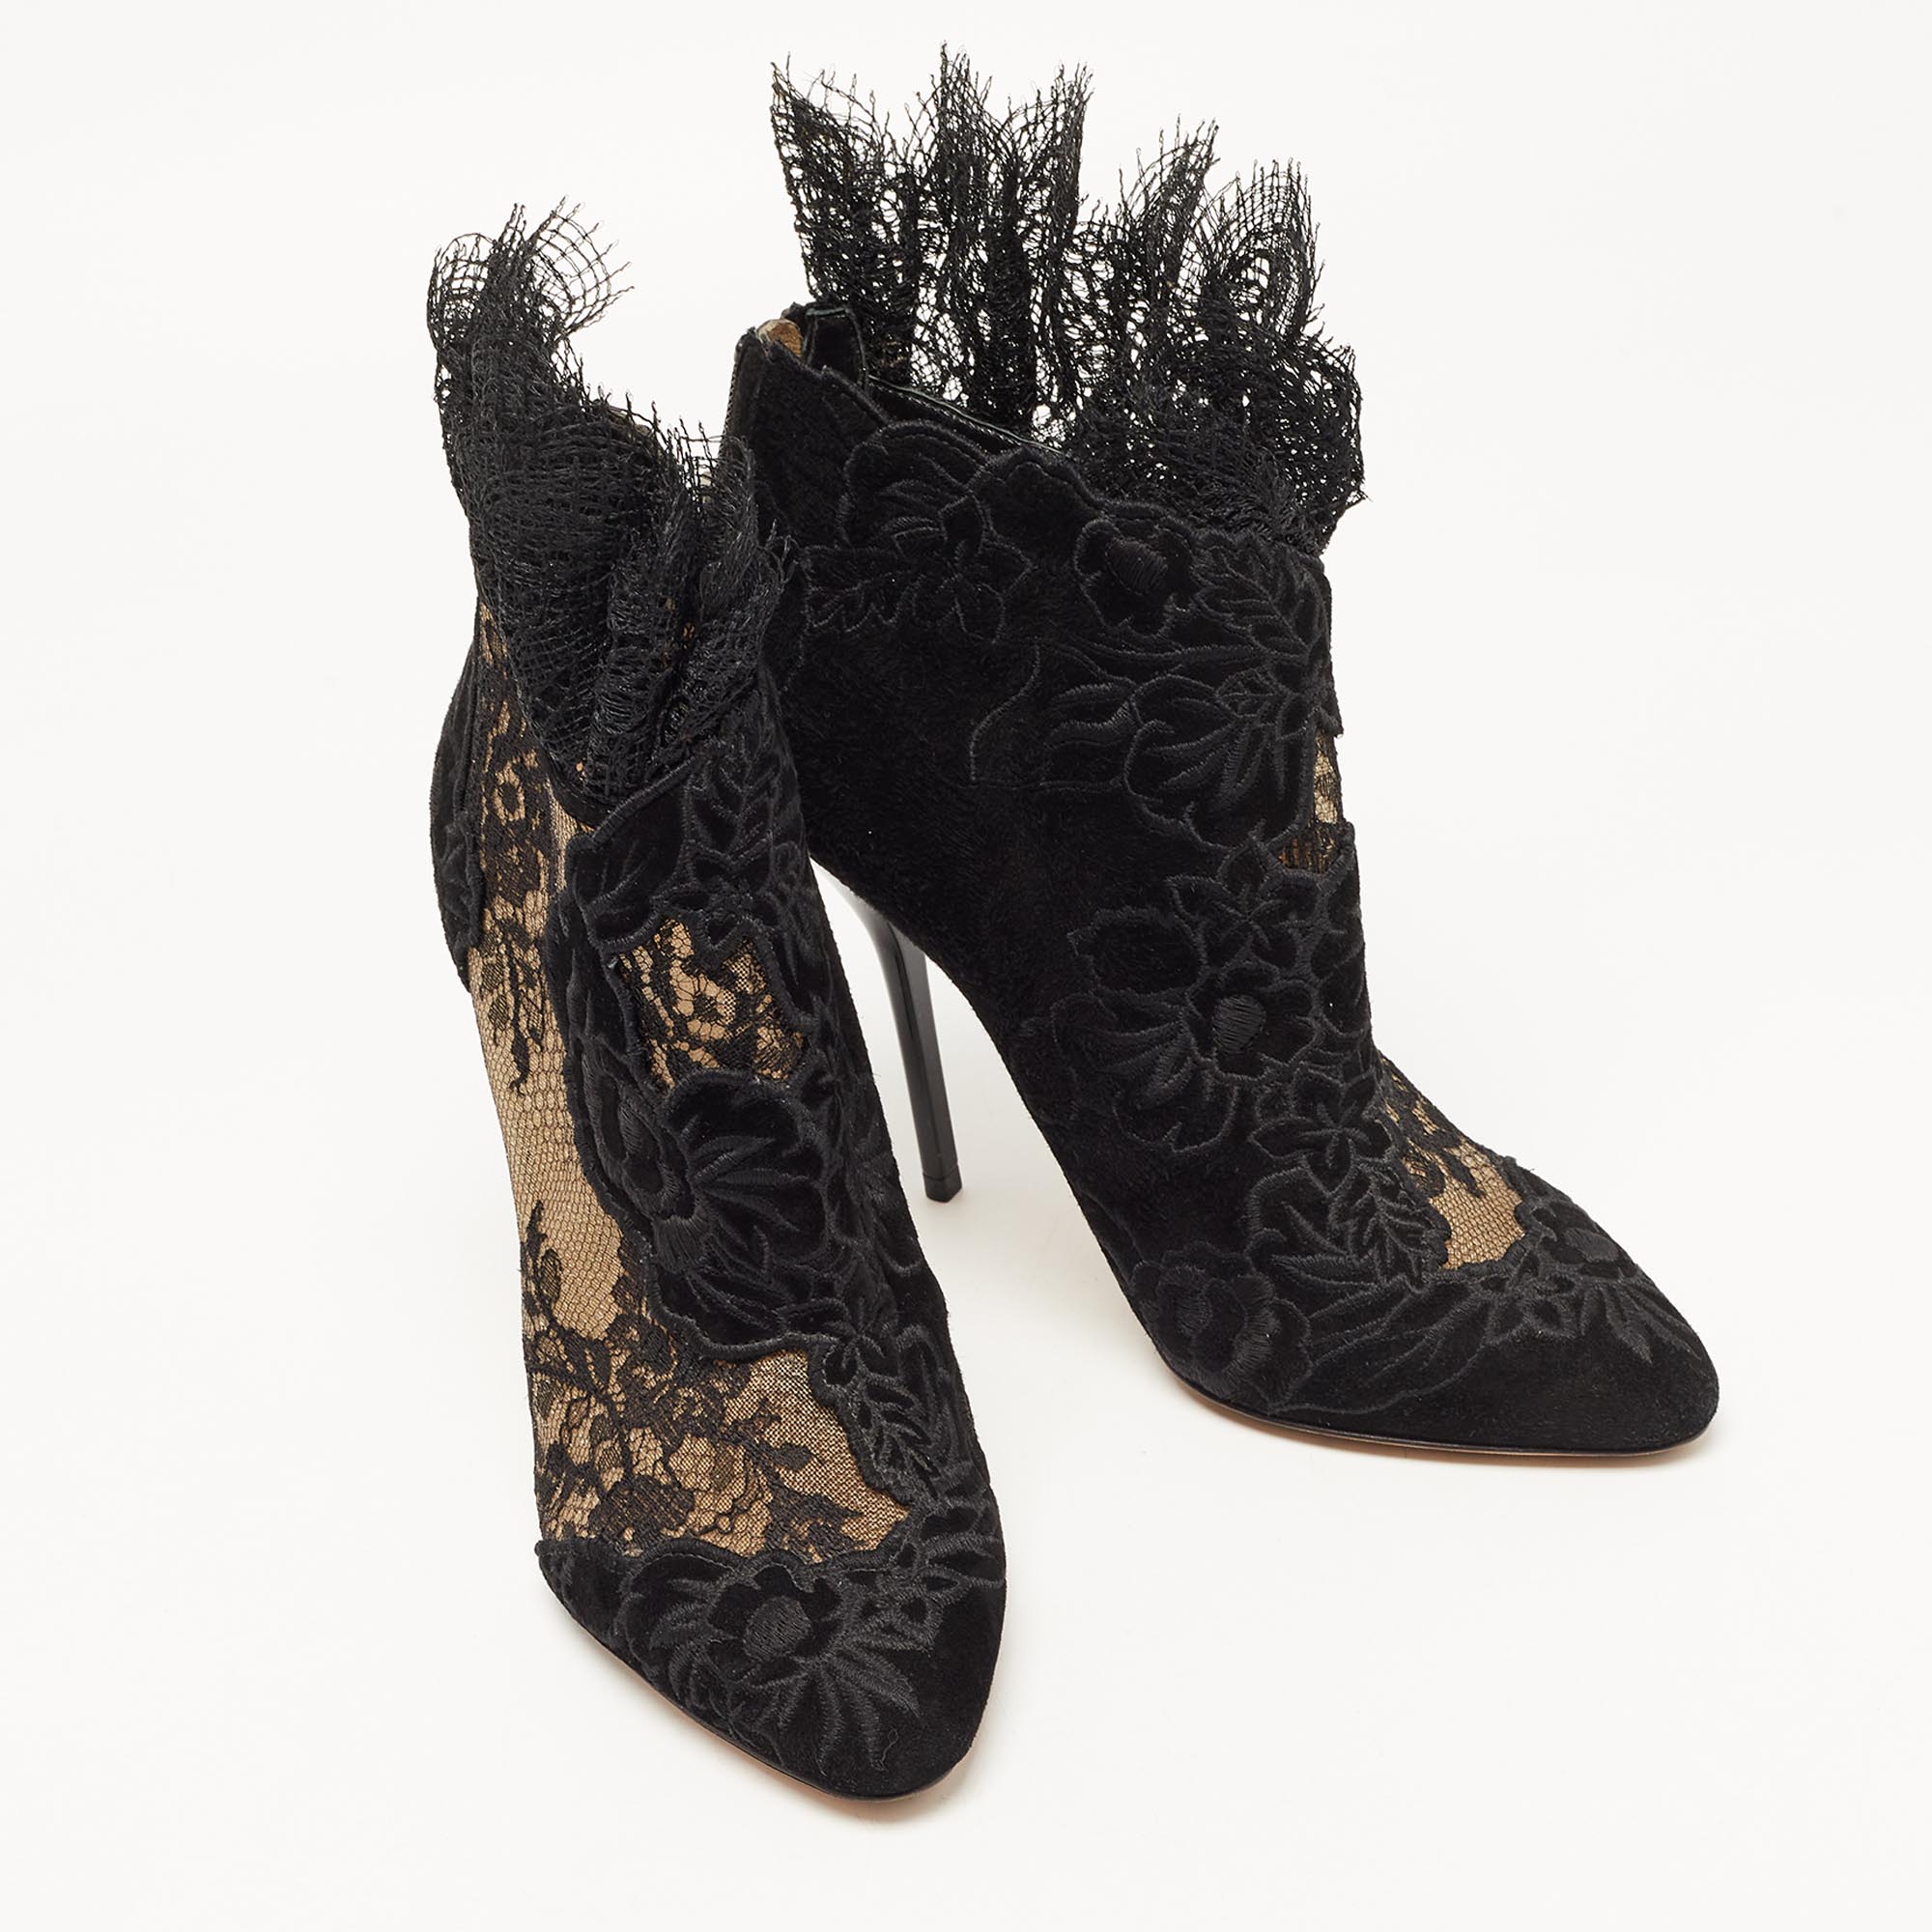 Jimmy Choo Black Lace And Floral Embroidered Suede Kamaris Ankle Booties Size 37